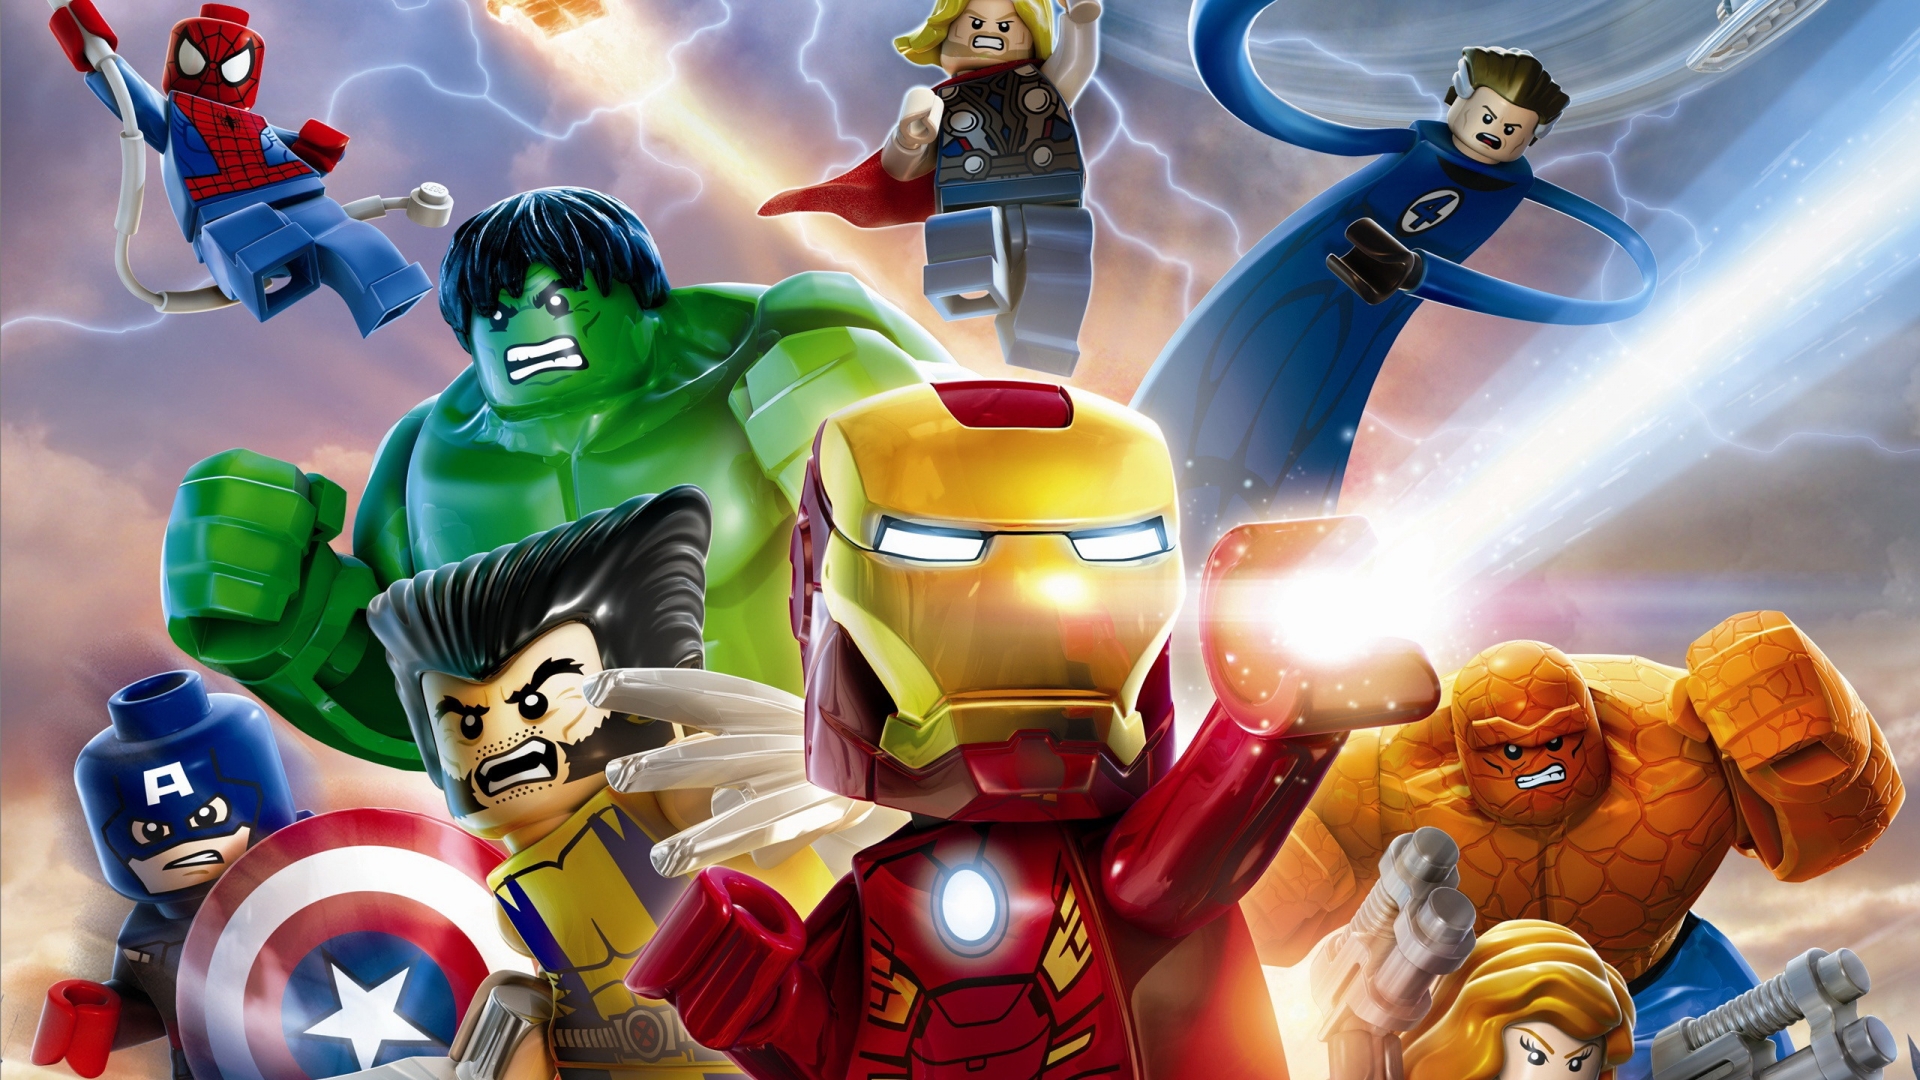 Marvel Super Heroes by Lego for 1920 x 1080 HDTV 1080p resolution